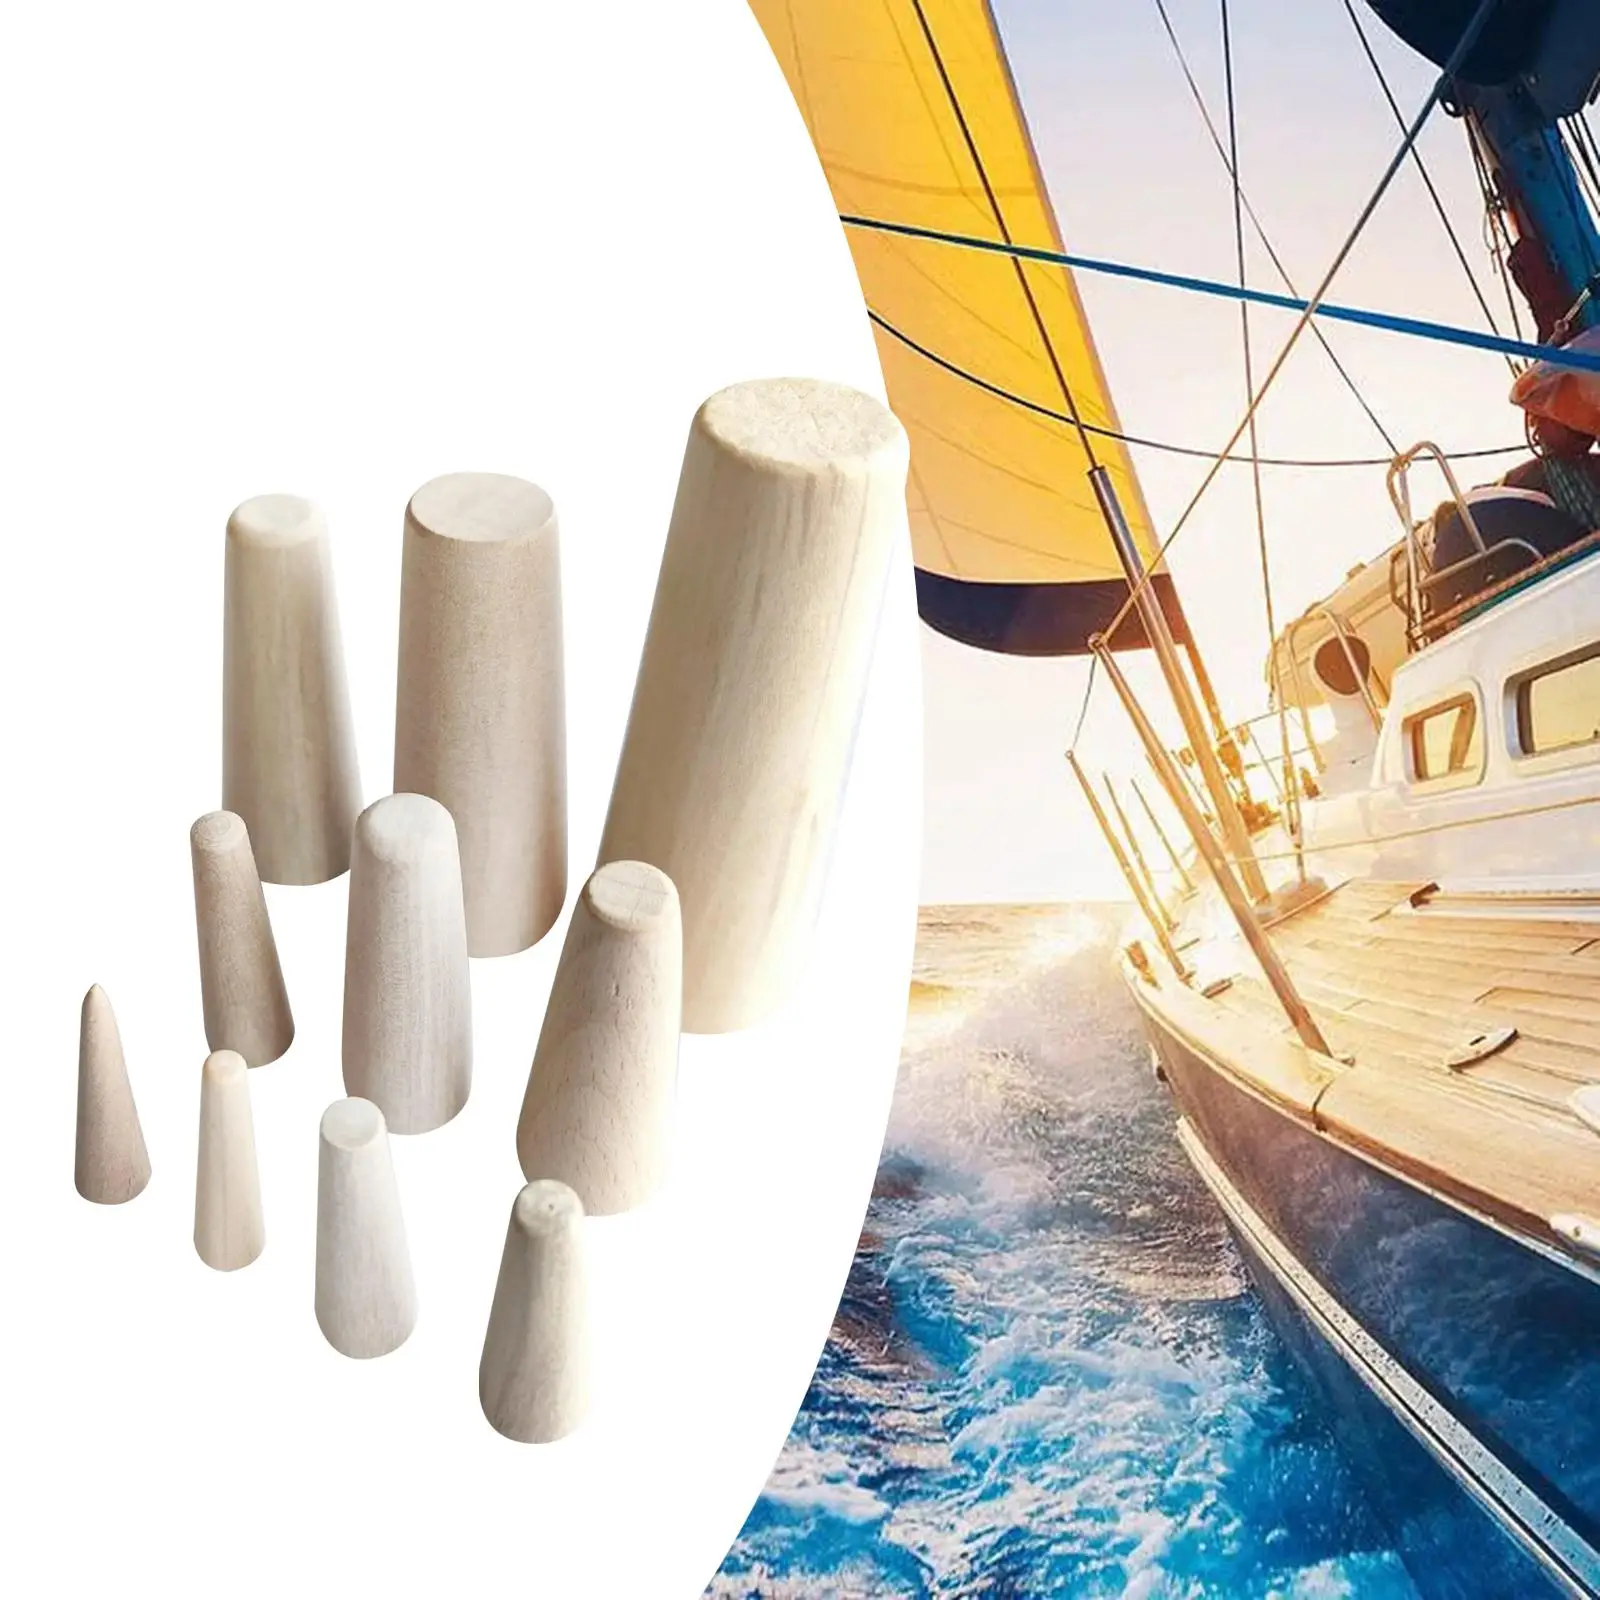 10x Boat Emergency Wood Plugs Assorted Stops Emergency Leaks 7 Different Sizes thru Hull Drain Plug Wooden Bungs for Yacht Pipes